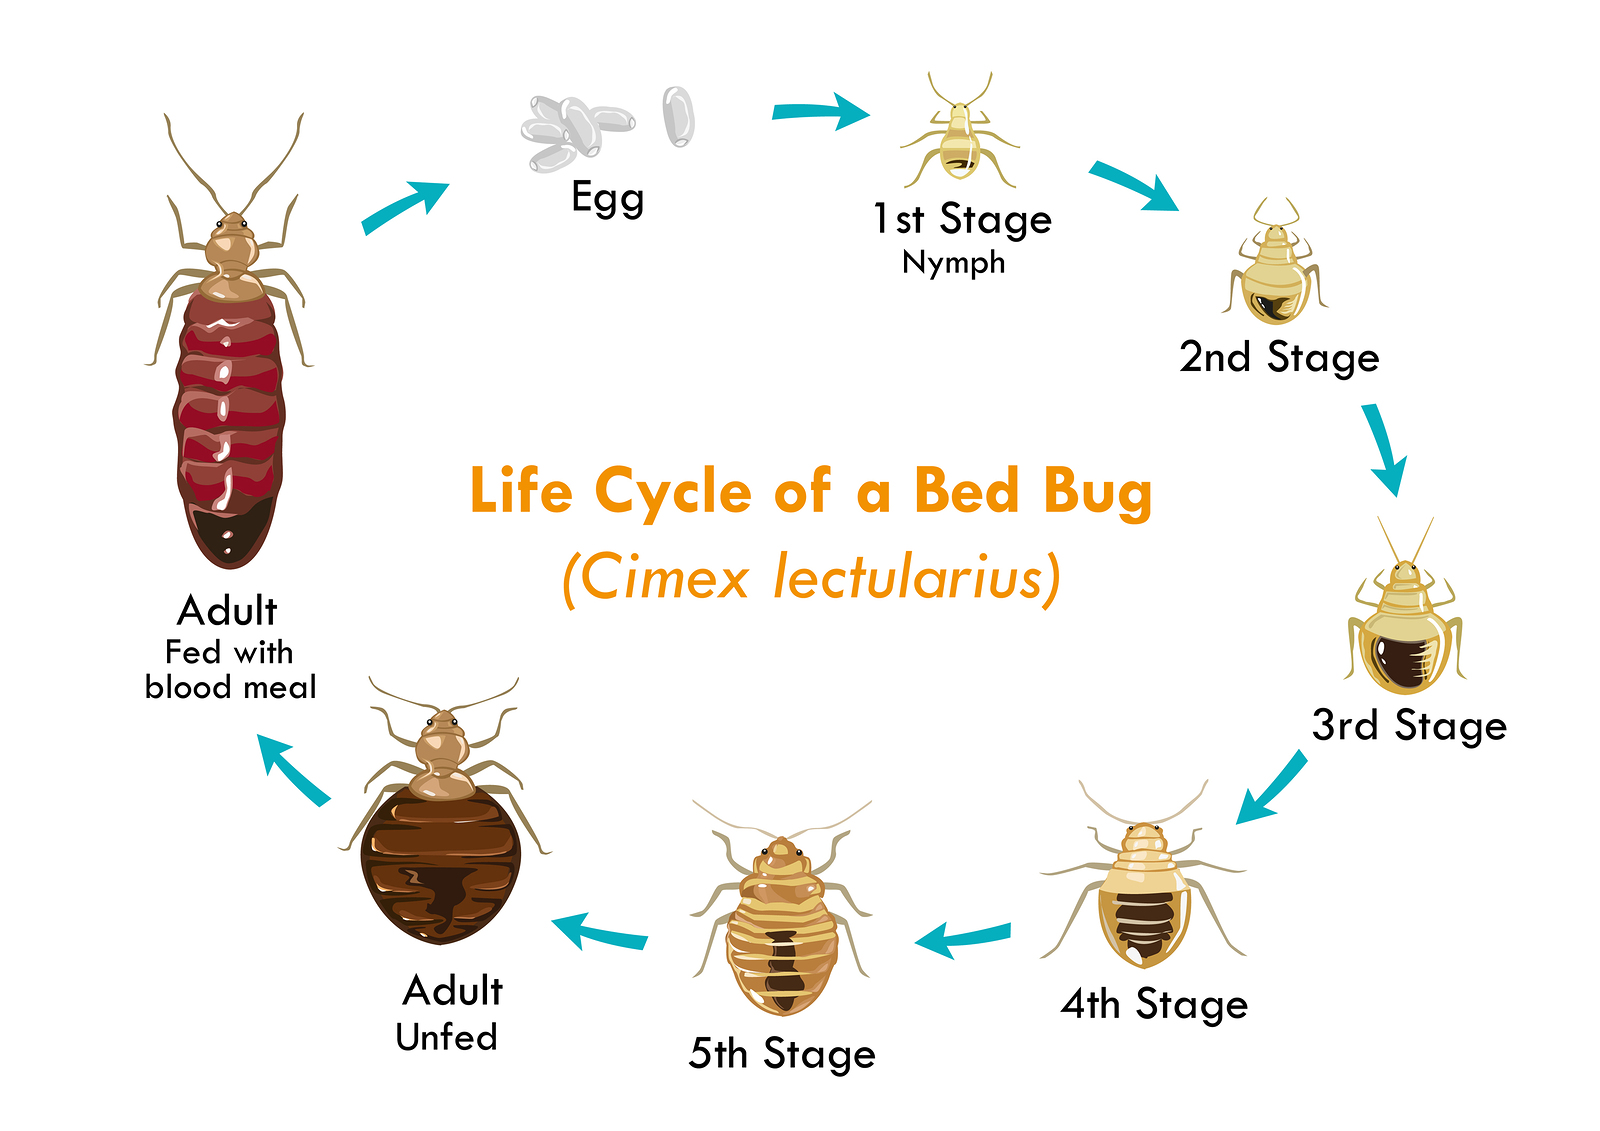 Click here to load the Bedbug Life Cycle pdf.